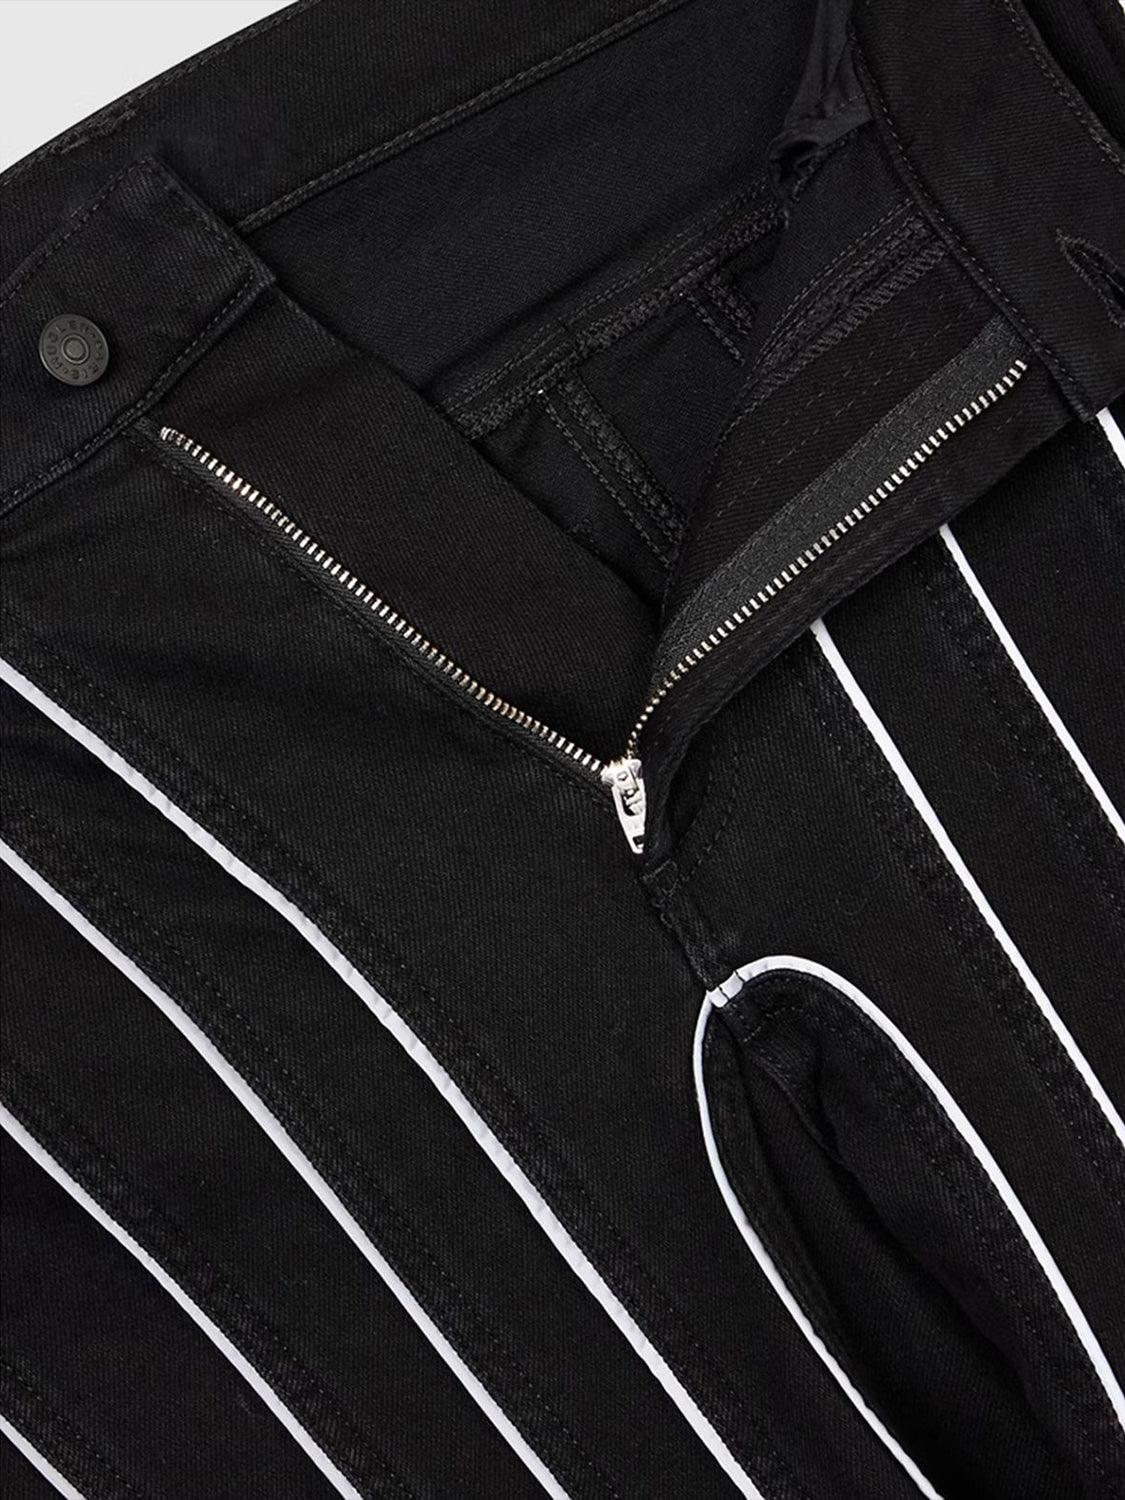 a close up of a black pants with white stripes